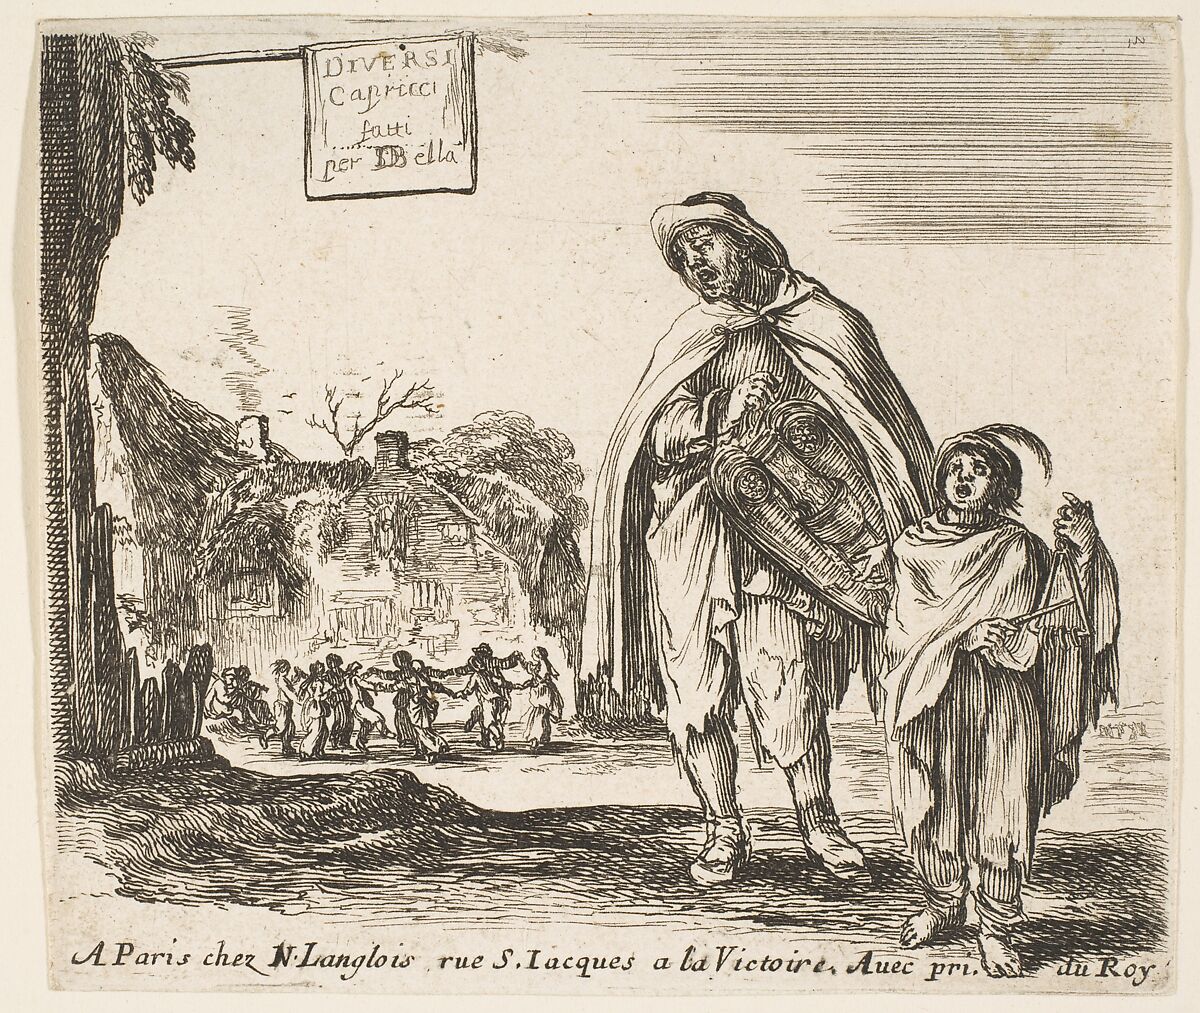 A man sings and plays the hurdy gurdy, accompanied by a boy playing the triangle to right, a group of peasants dancing in a ring to left in background, plate 1 and title page for "Diversi capricci", Stefano della Bella (Italian, Florence 1610–1664 Florence), Etching; third state of four (De Vesme) 